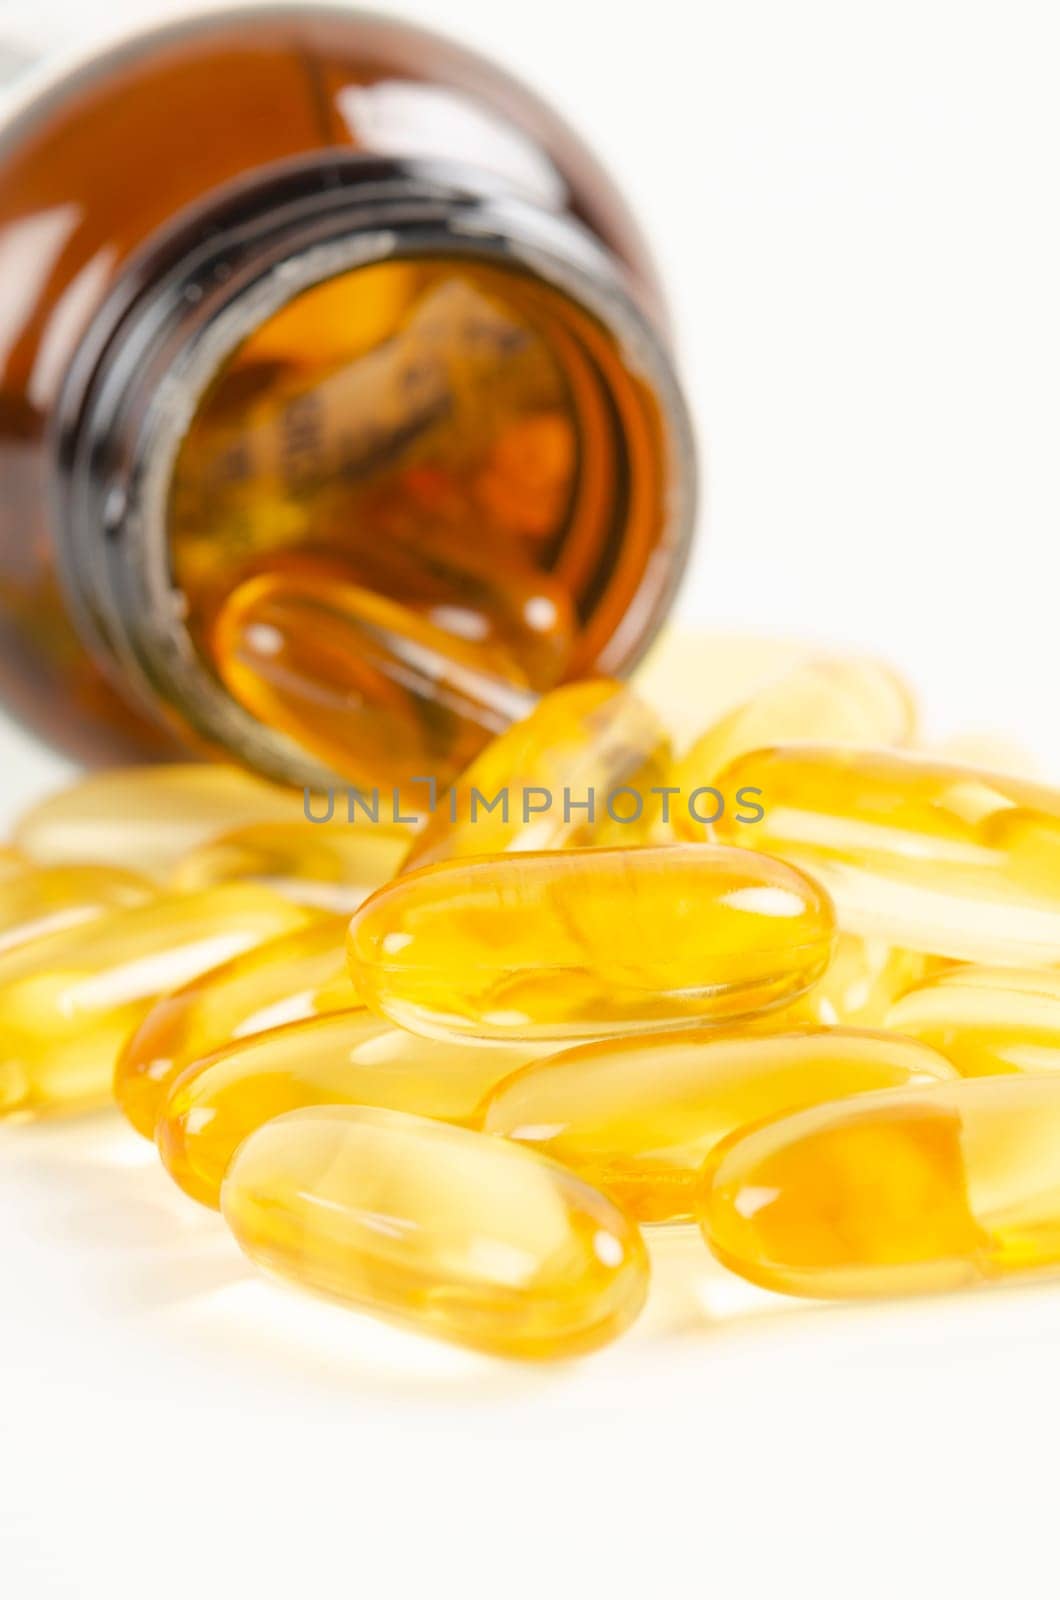 Fish oil capsules in a glass bottle on white background.